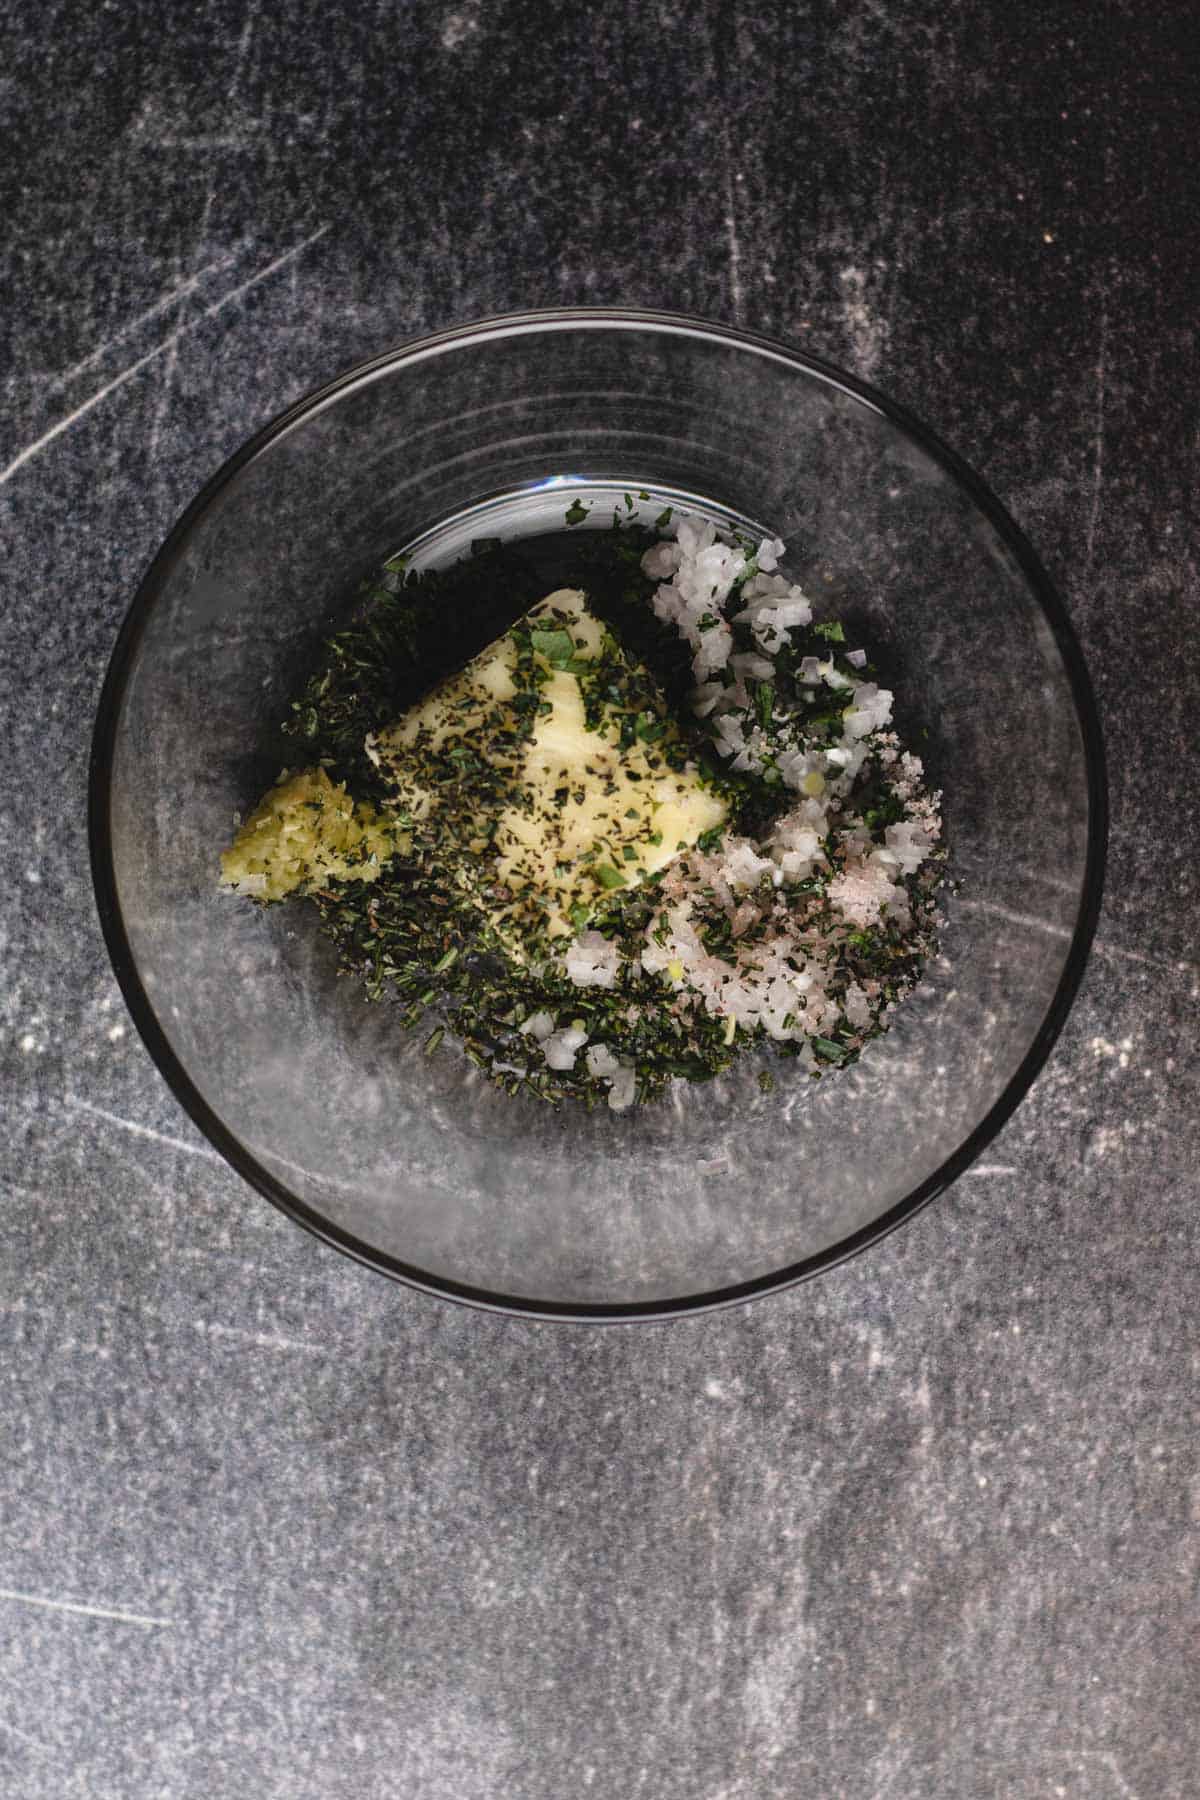 Garlic-herb ingredients in a small glass bowl.